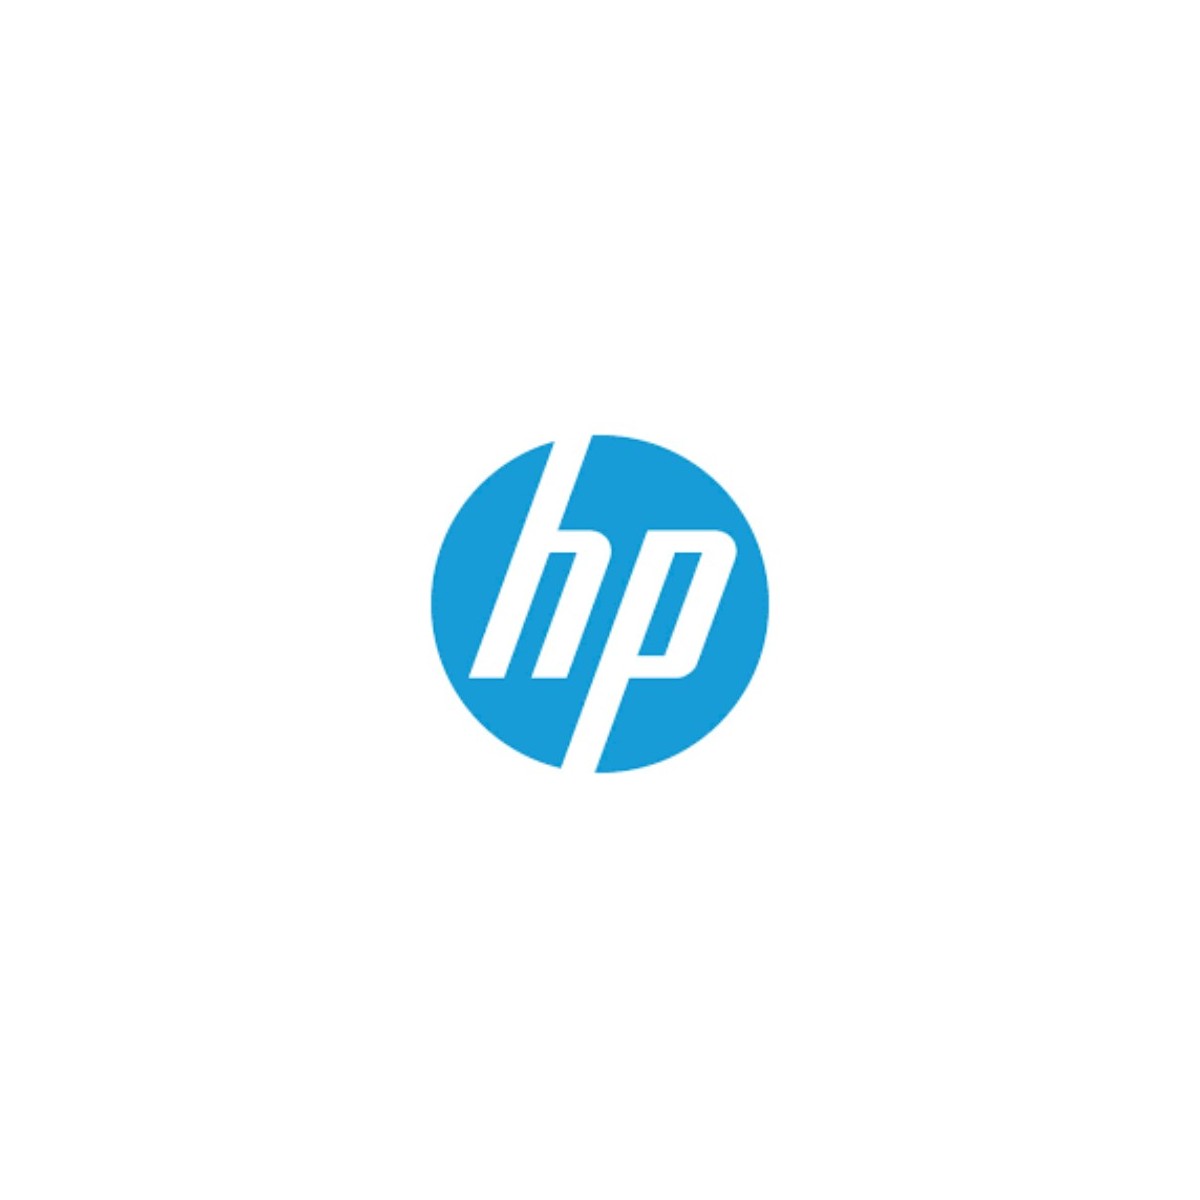 HP LRSMKY2E - 100 - 499 license(s) - Electronic Software Download (ESD)